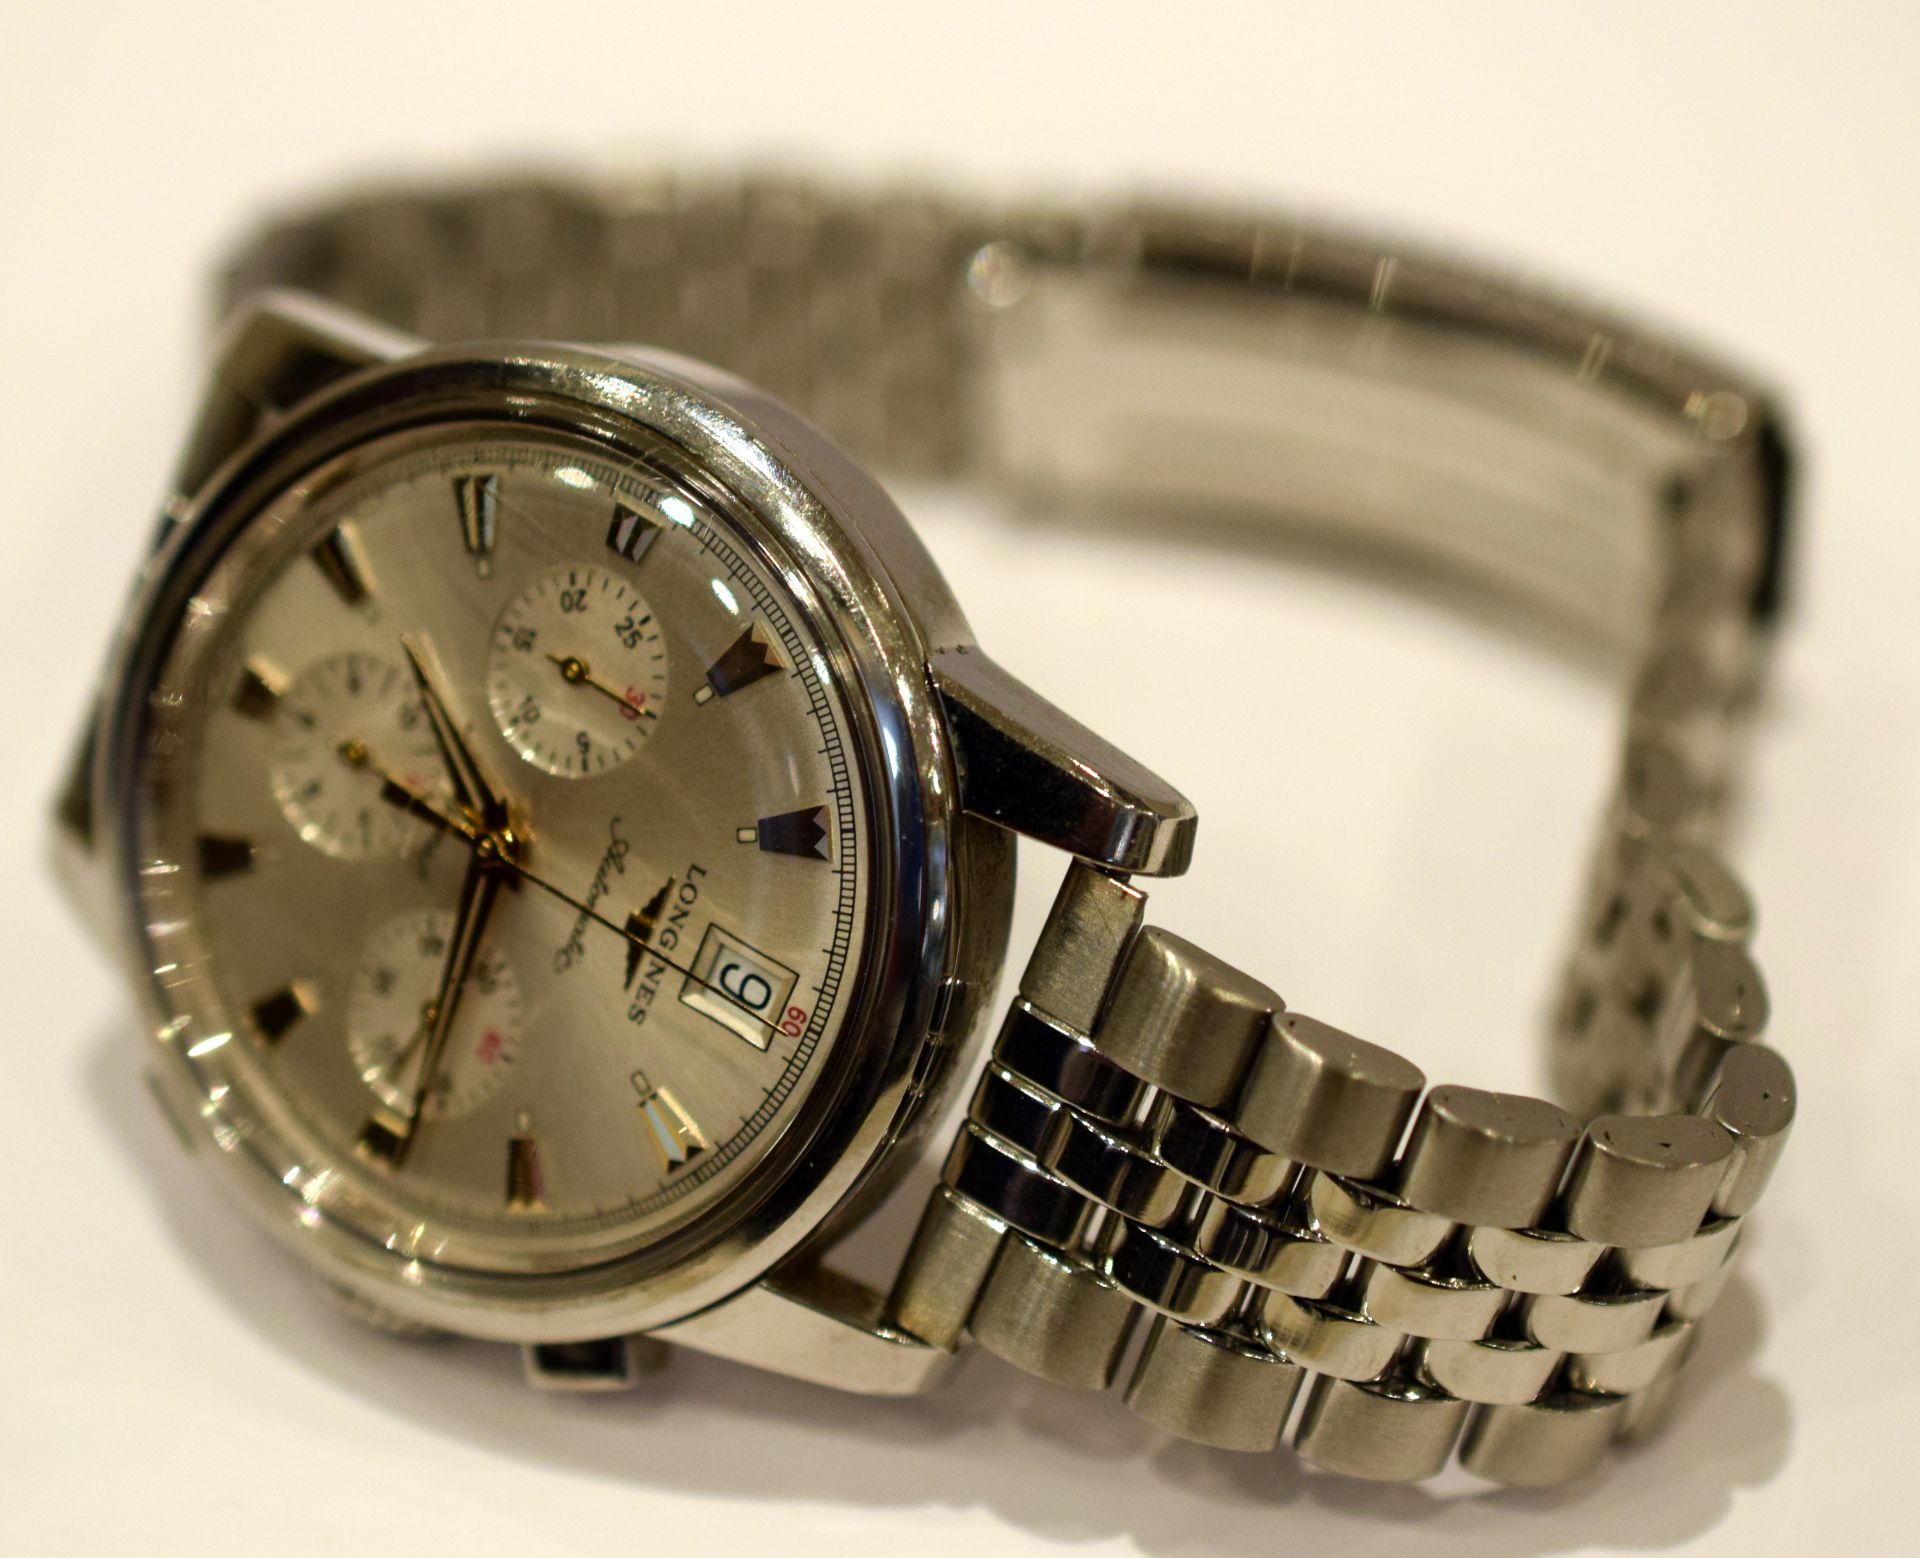 Longines Conquest Chrono Date Chronograph - Image 3 of 4